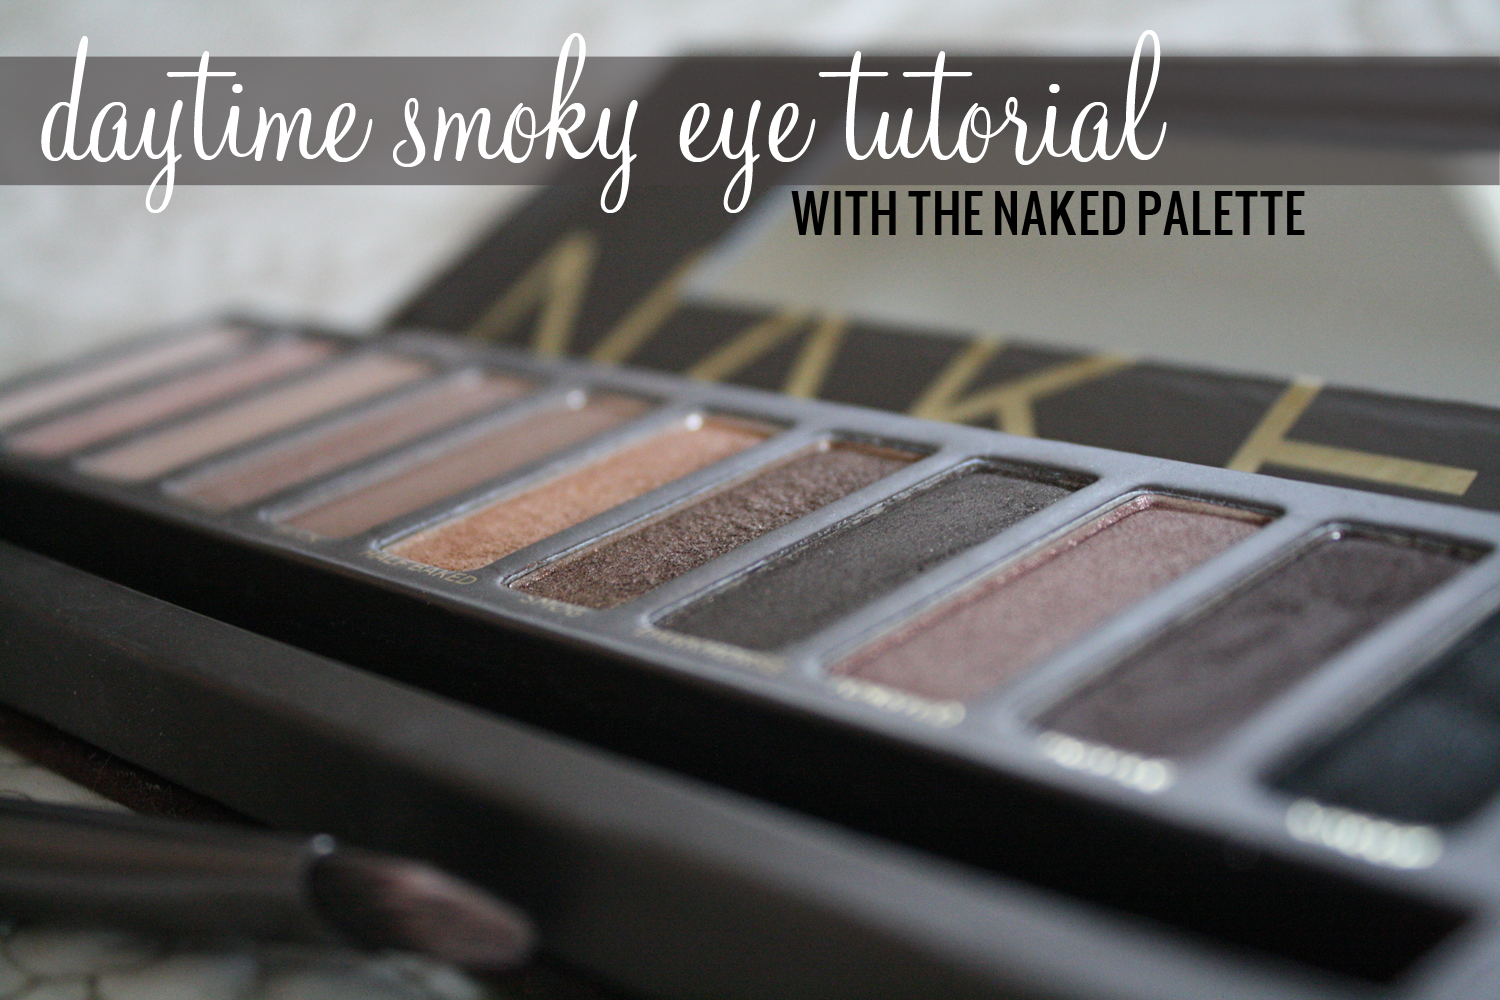 Daytime Smoky Eye Tutorial with the Naked Palette